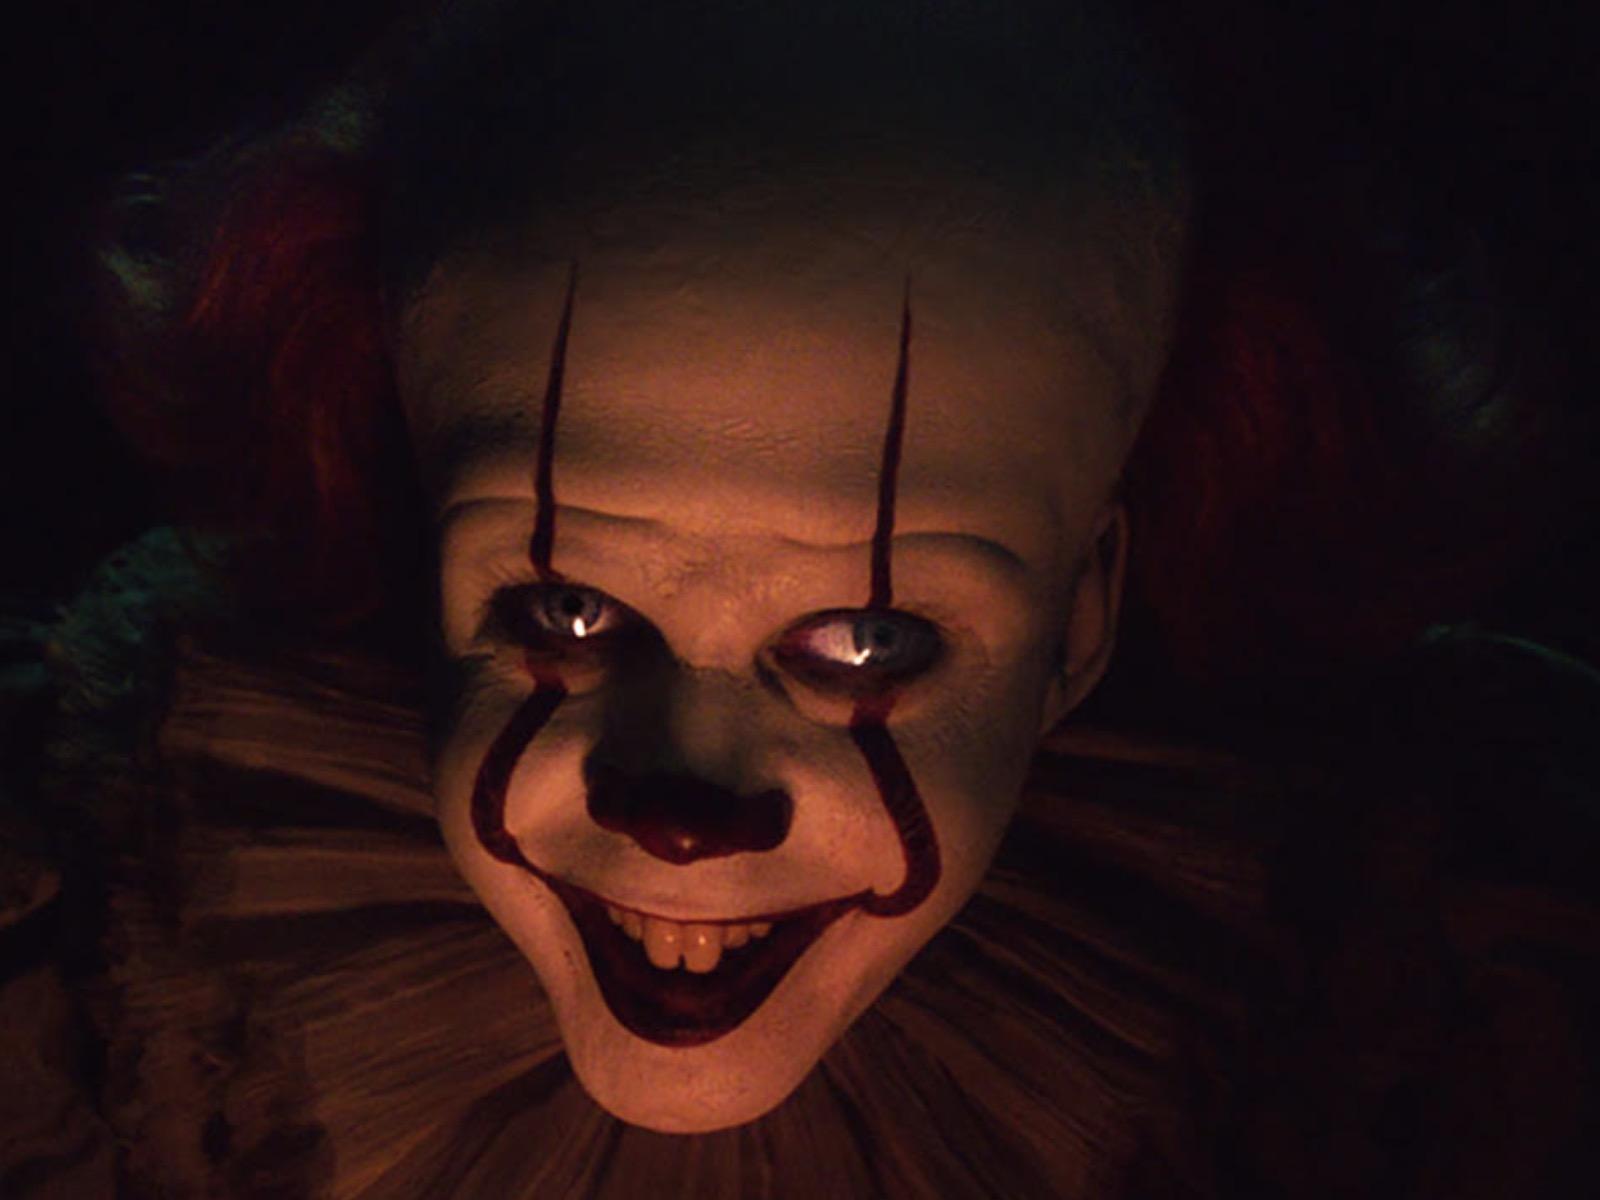 Watch: The New IT: CHAPTER TWO Has Arrived + Looks Scary AF